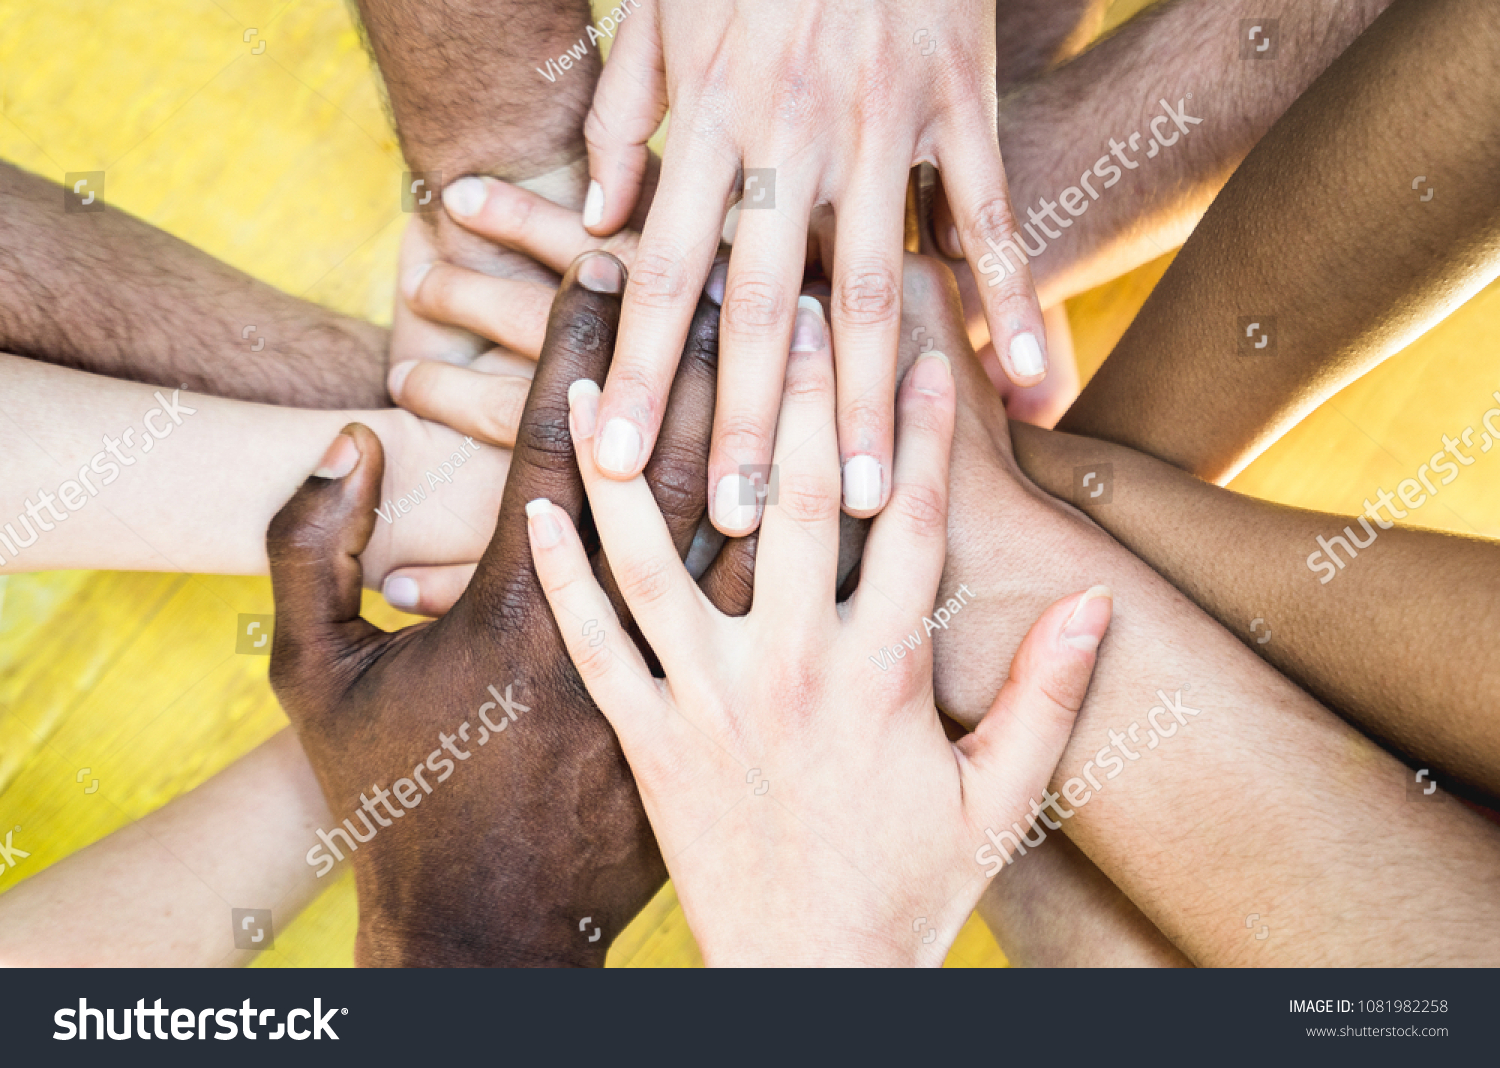 Top view of multicolored stacking hands - International friendship concept with multiethnic people representing peace and unity against racism - Multi racial love and integration between diversity #1081982258